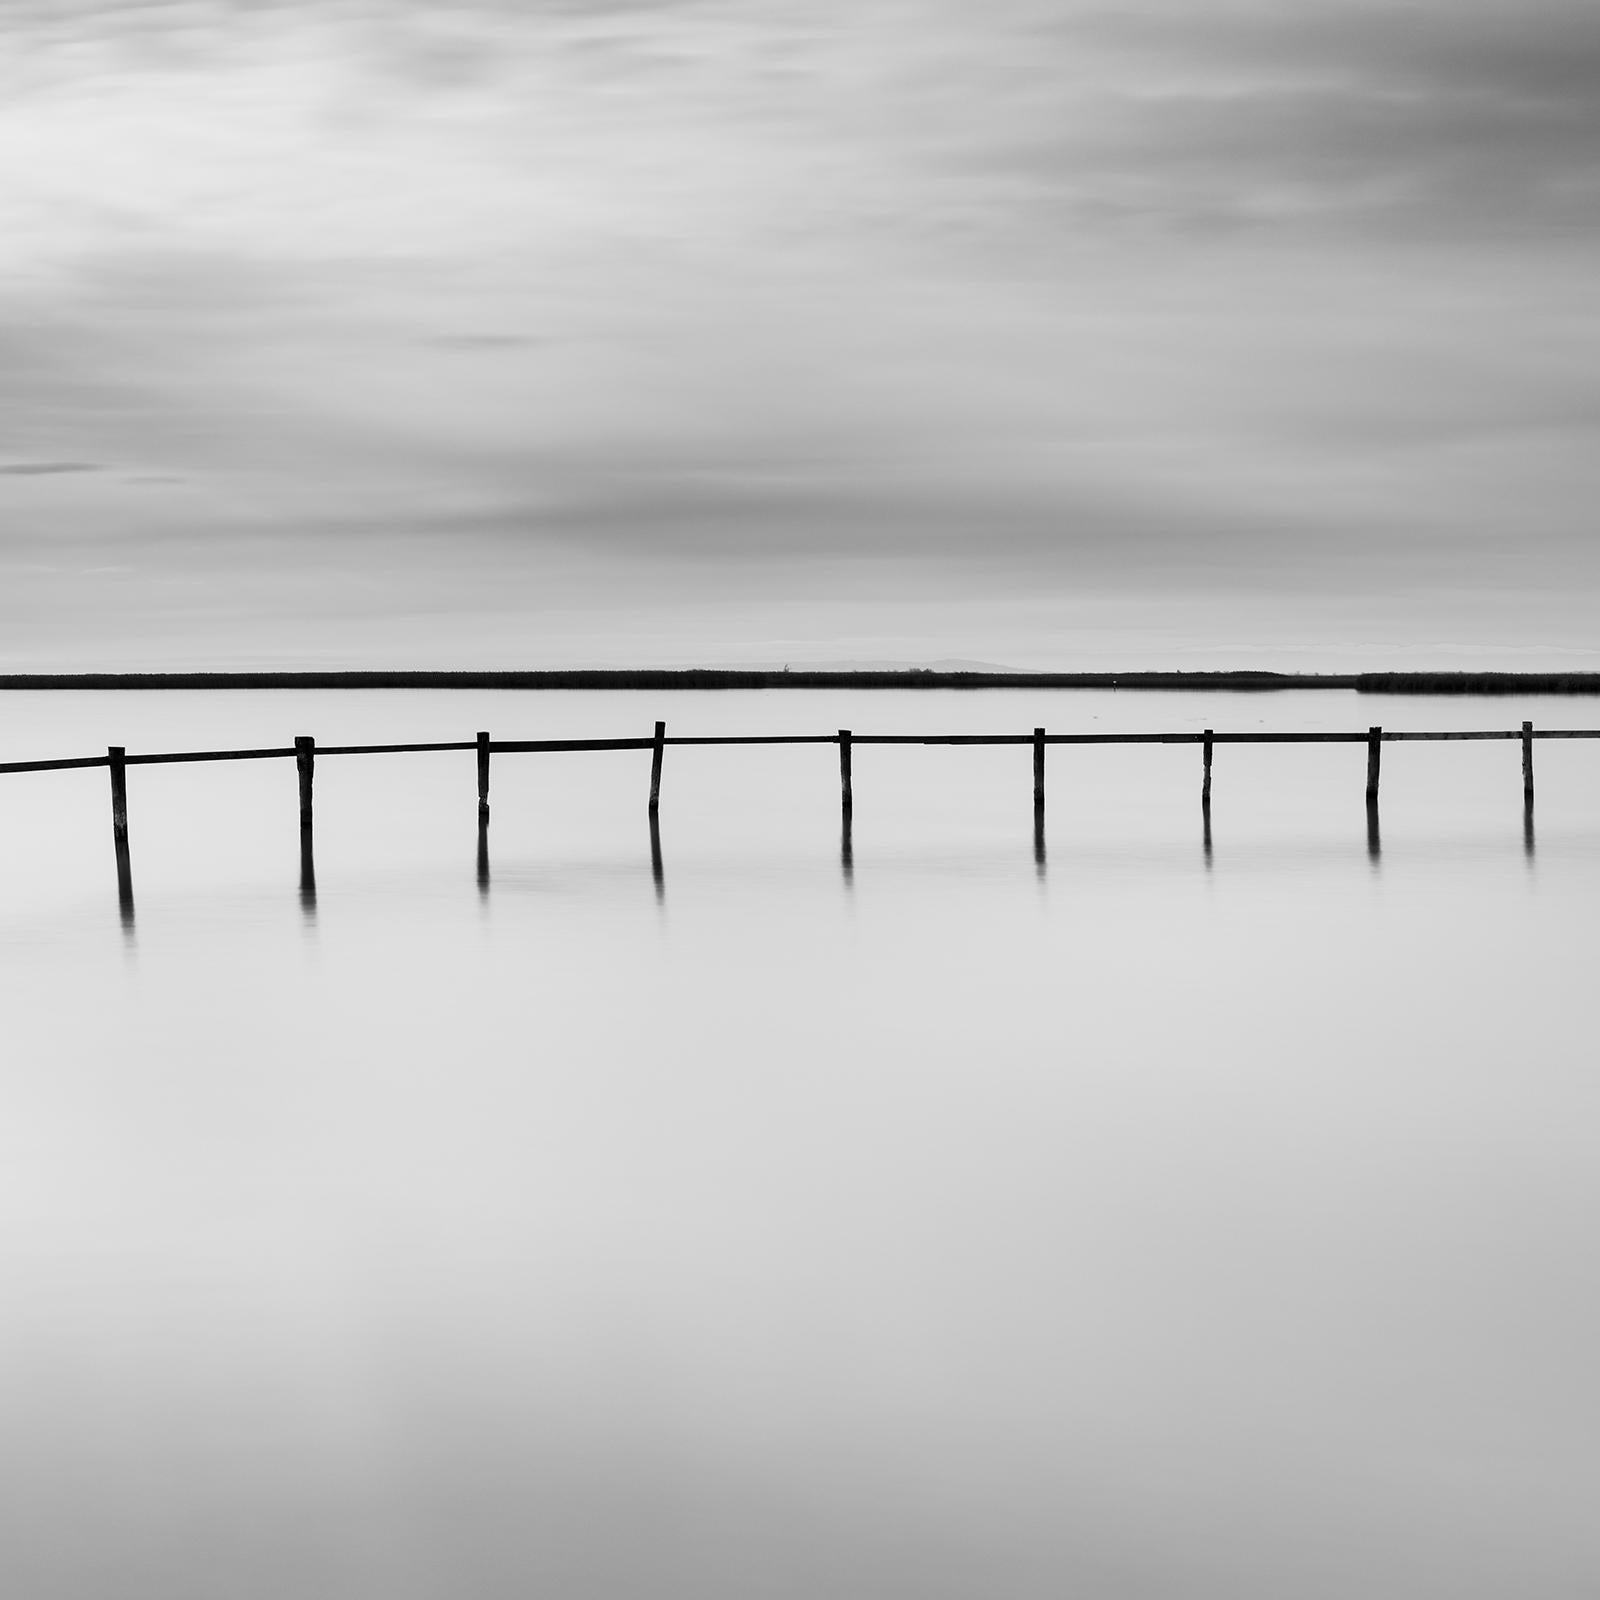 Swimming Area, cloudy, lake, black and white long exposure landscape photography For Sale 5